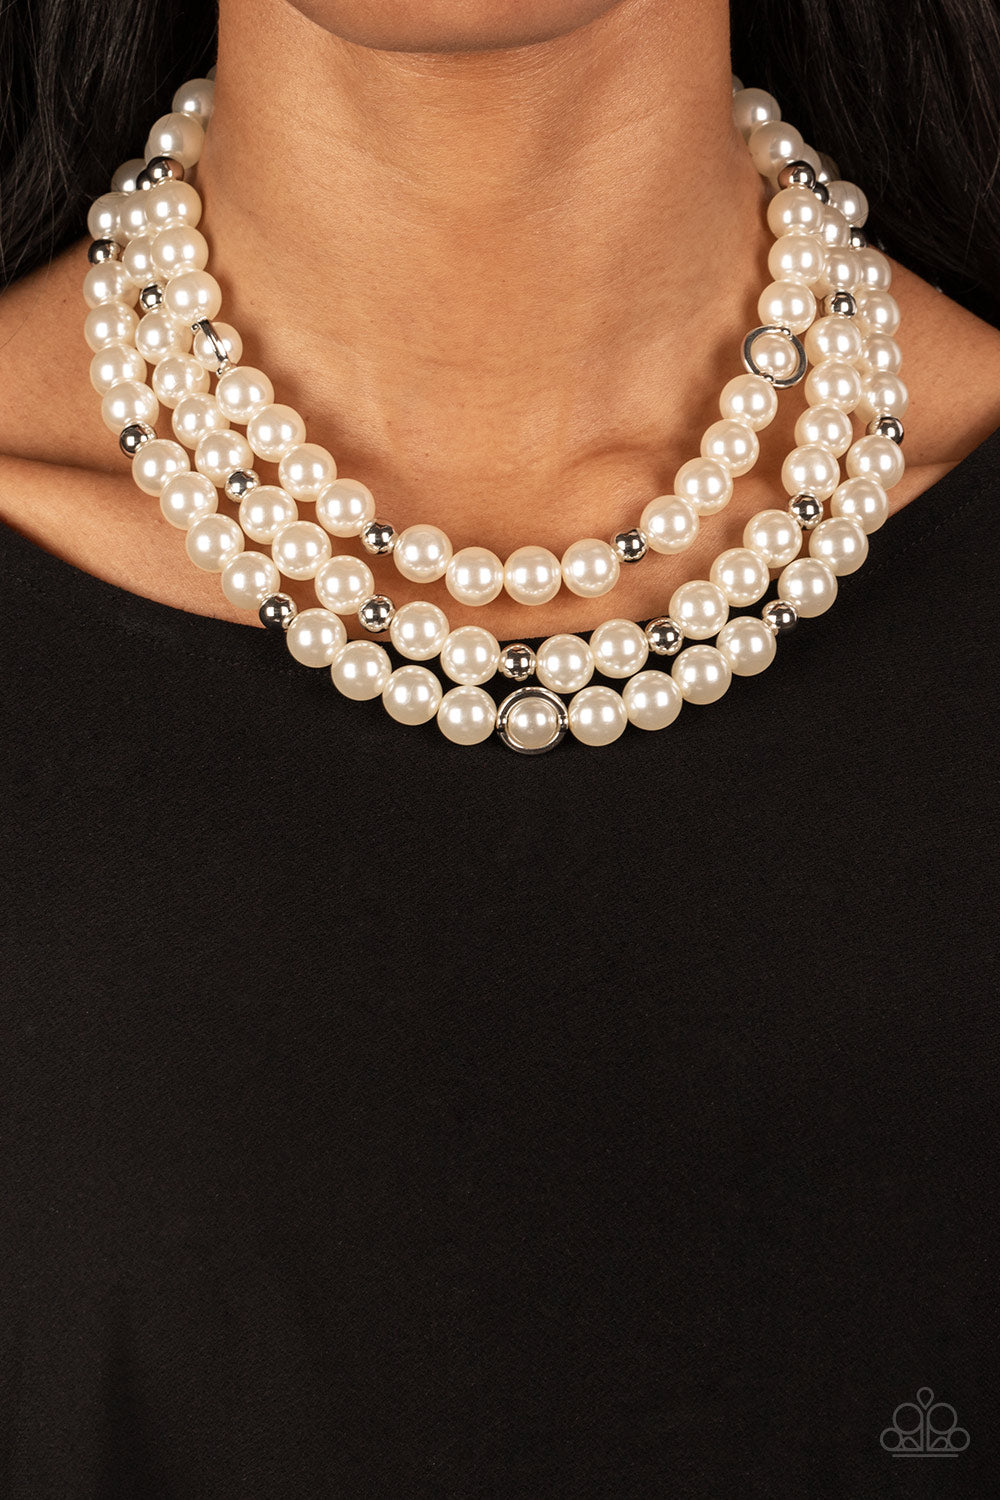 Infused with silver beads and silver rings, a bubbly collection of white pearls are threaded along invisible wires that cascade into effervescent layers below the collar. Features an adjustable clasp closure.